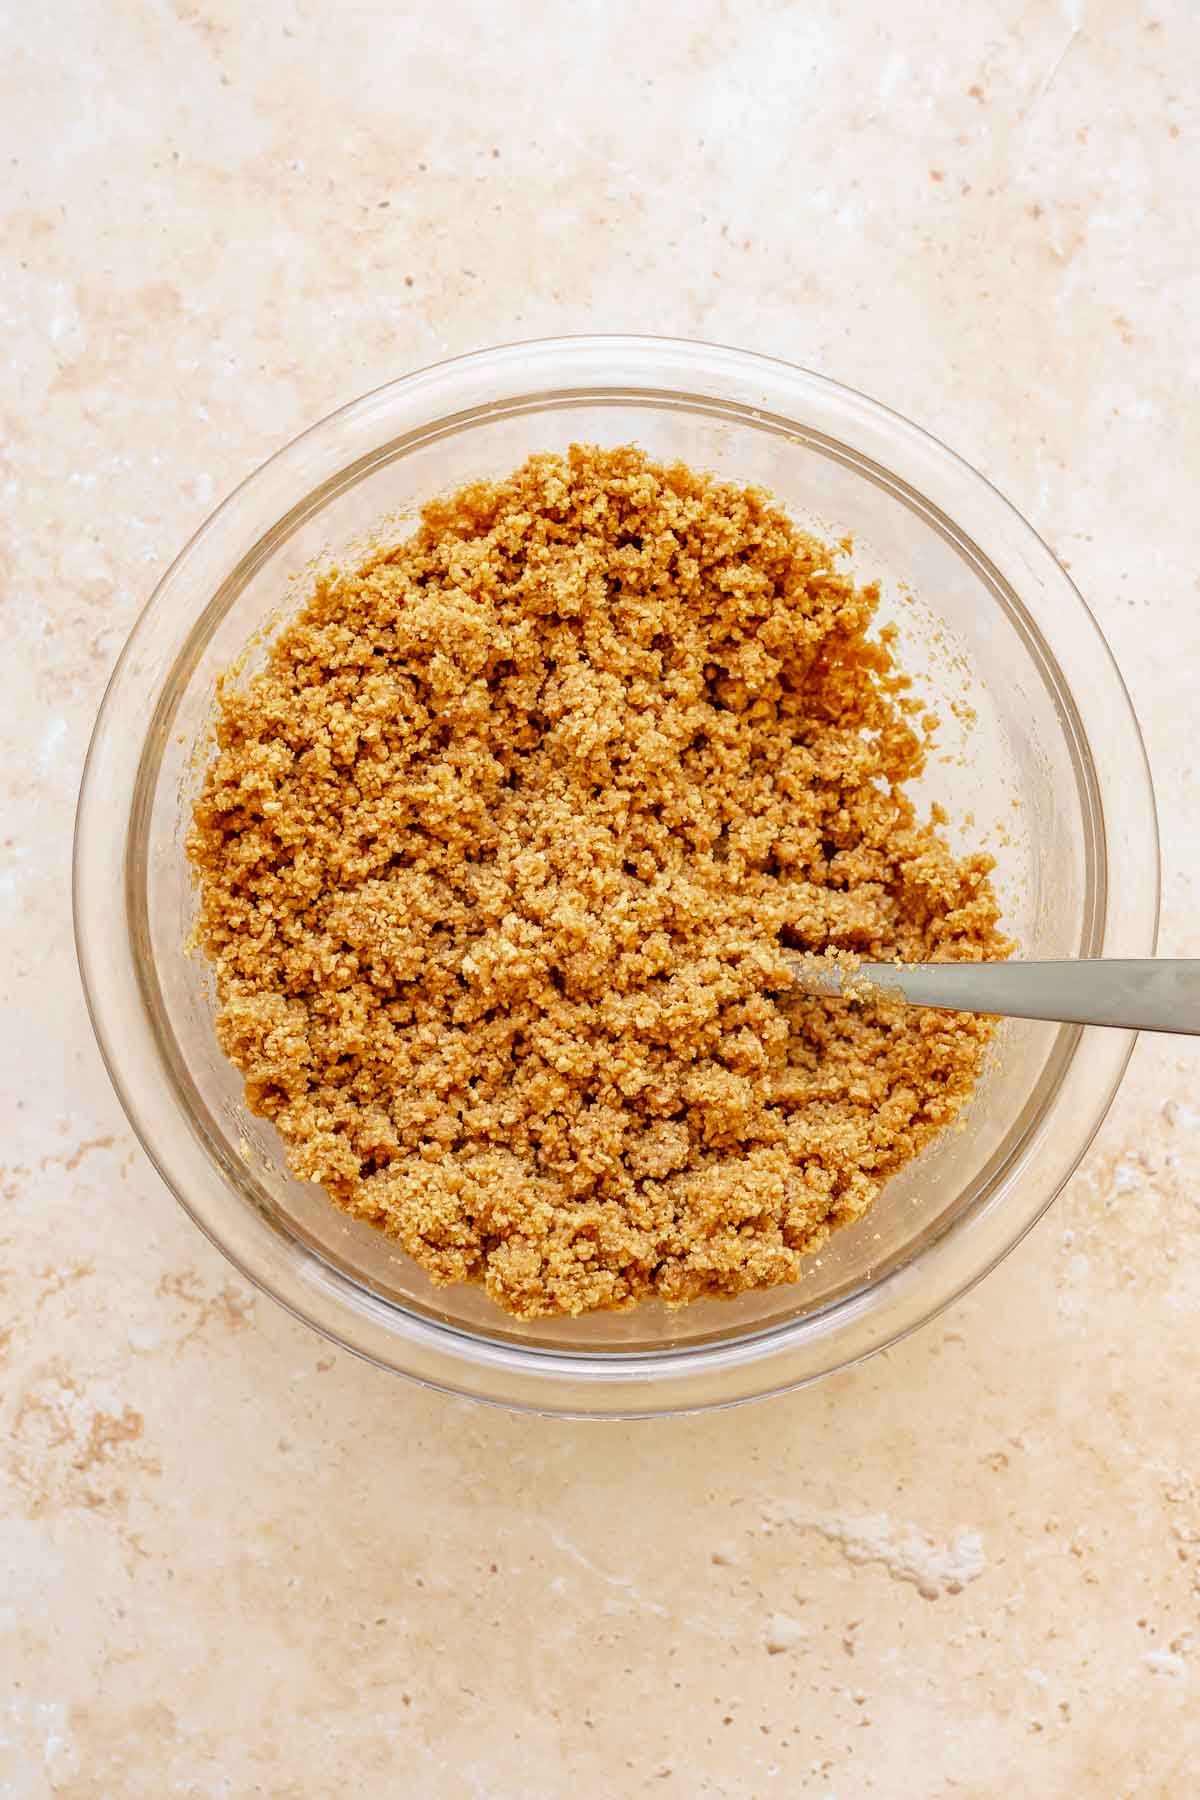 Moistened graham cracker crumbs in a bowl.